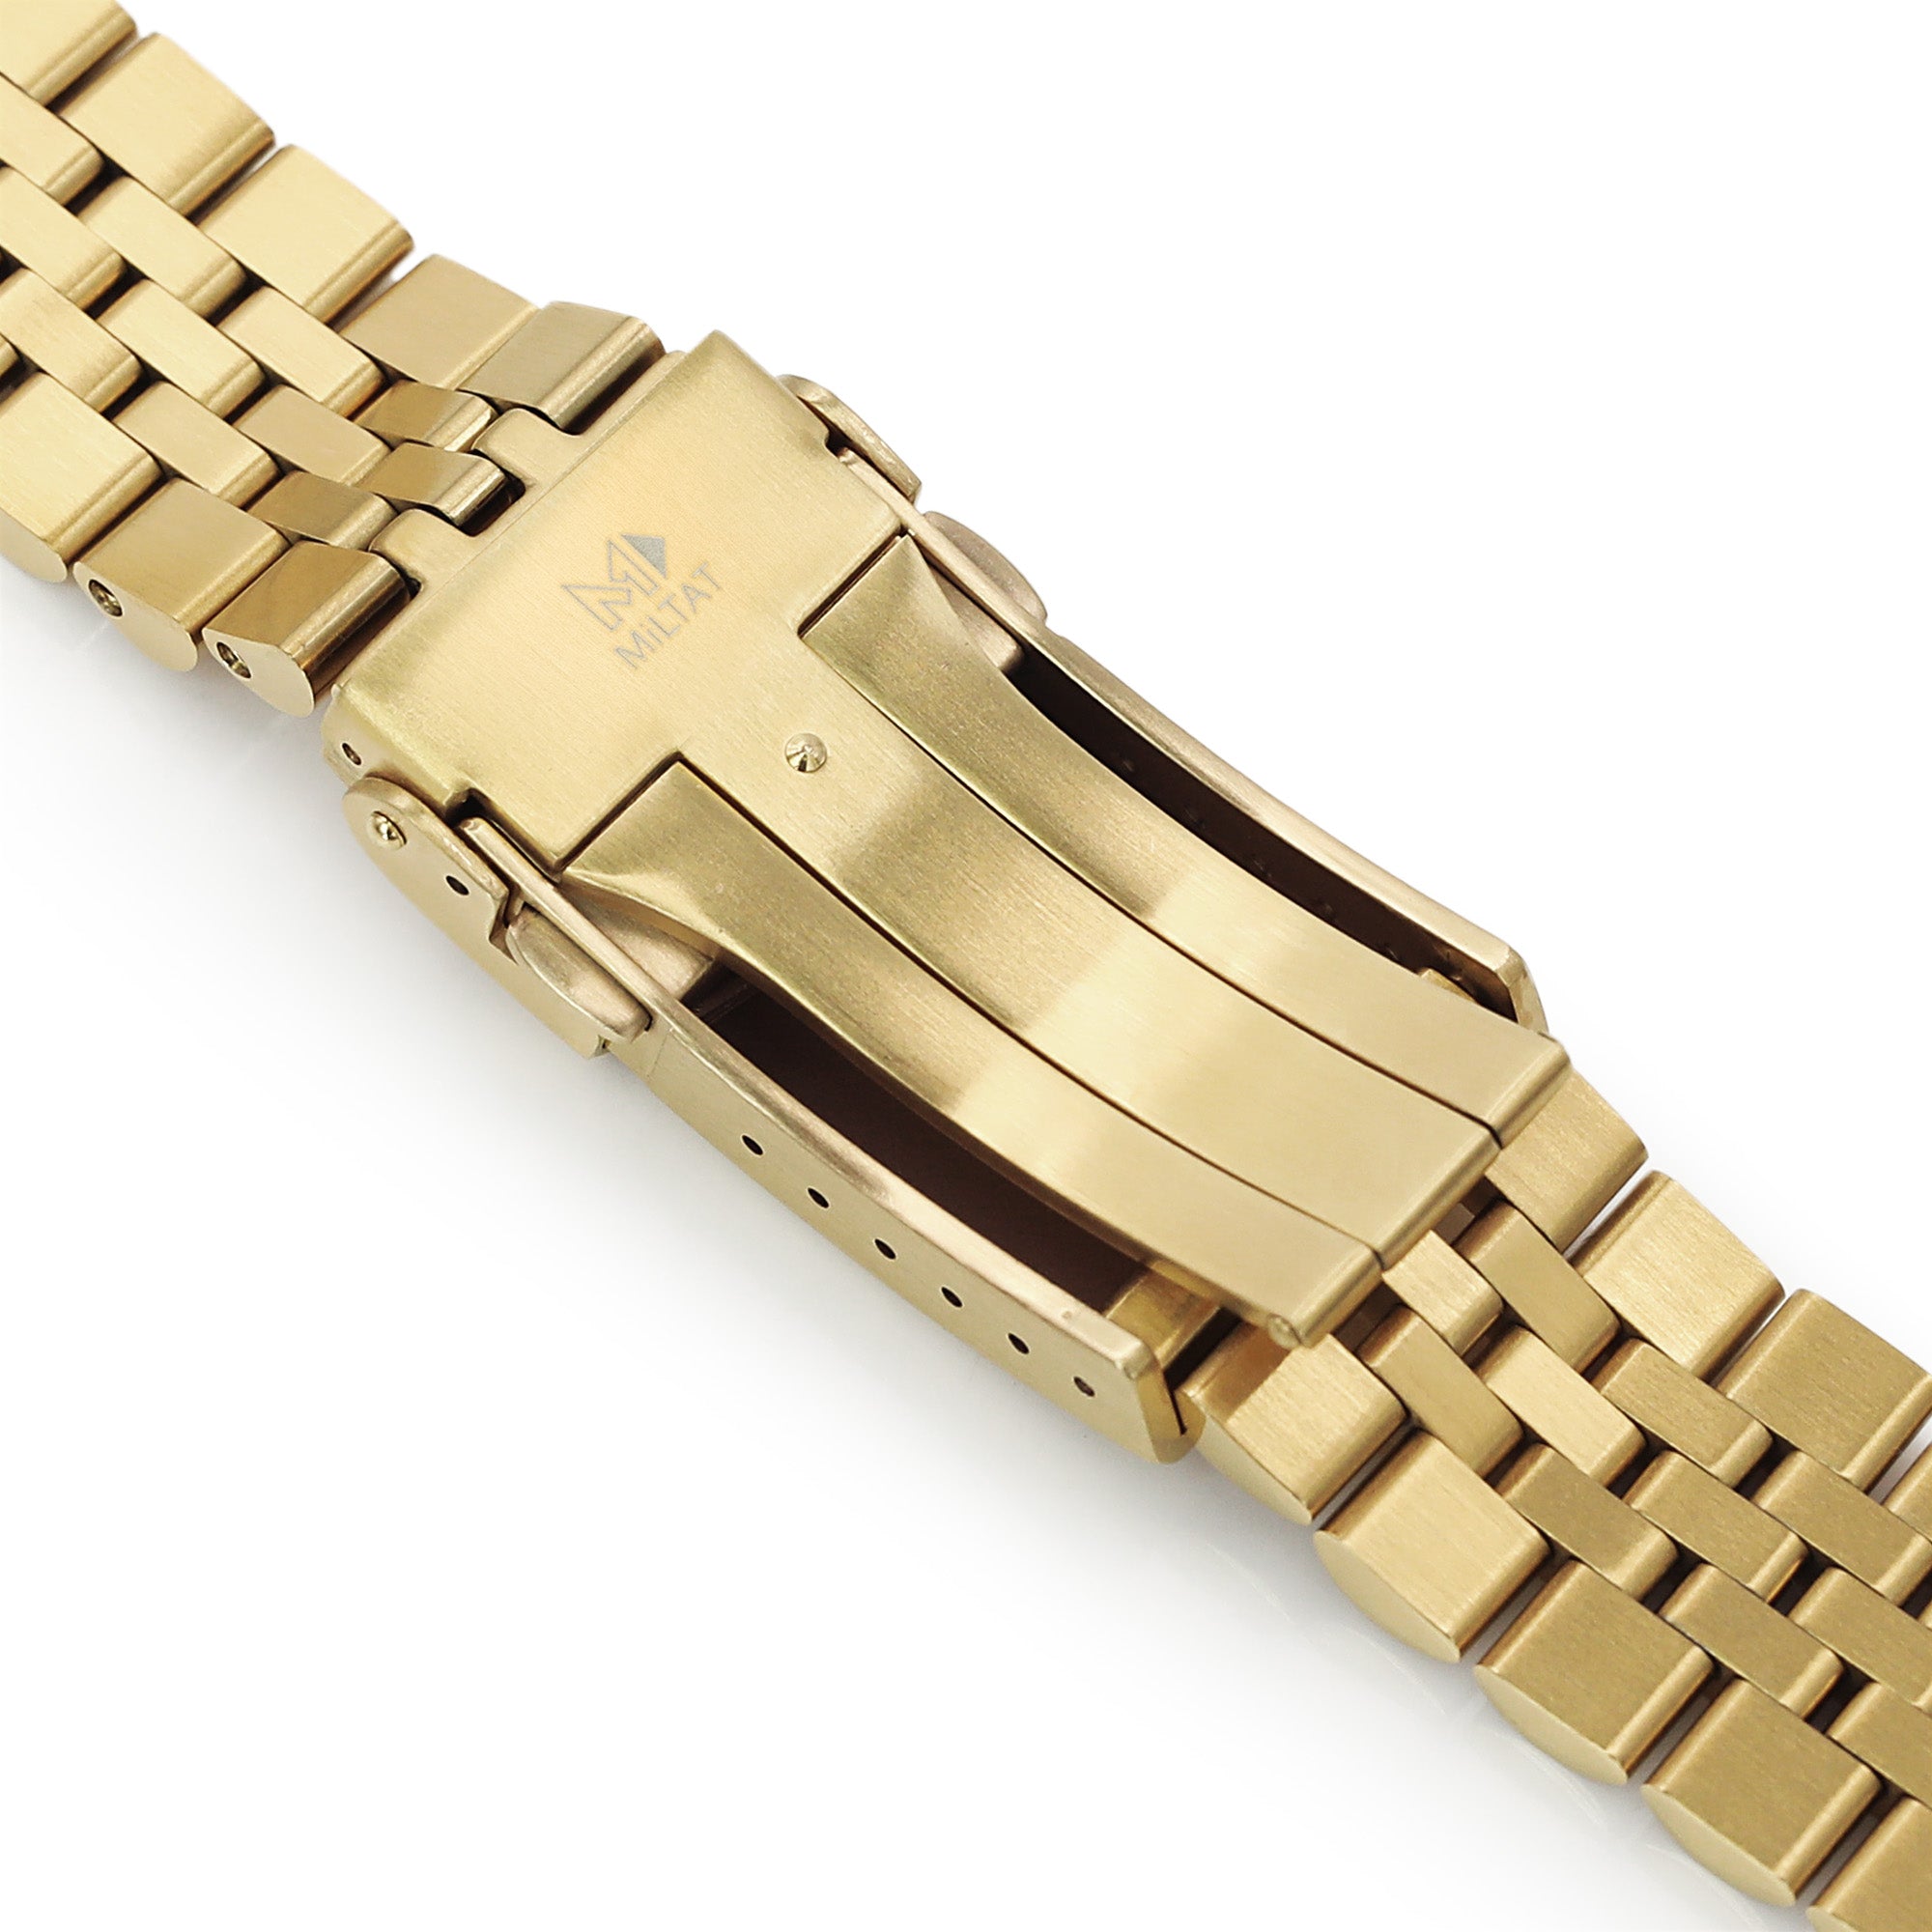 22mm Super-J Louis JUB Watch Band Straight End, 316L Stainless Steel Full IP Gold with Polished Center V-Clasp